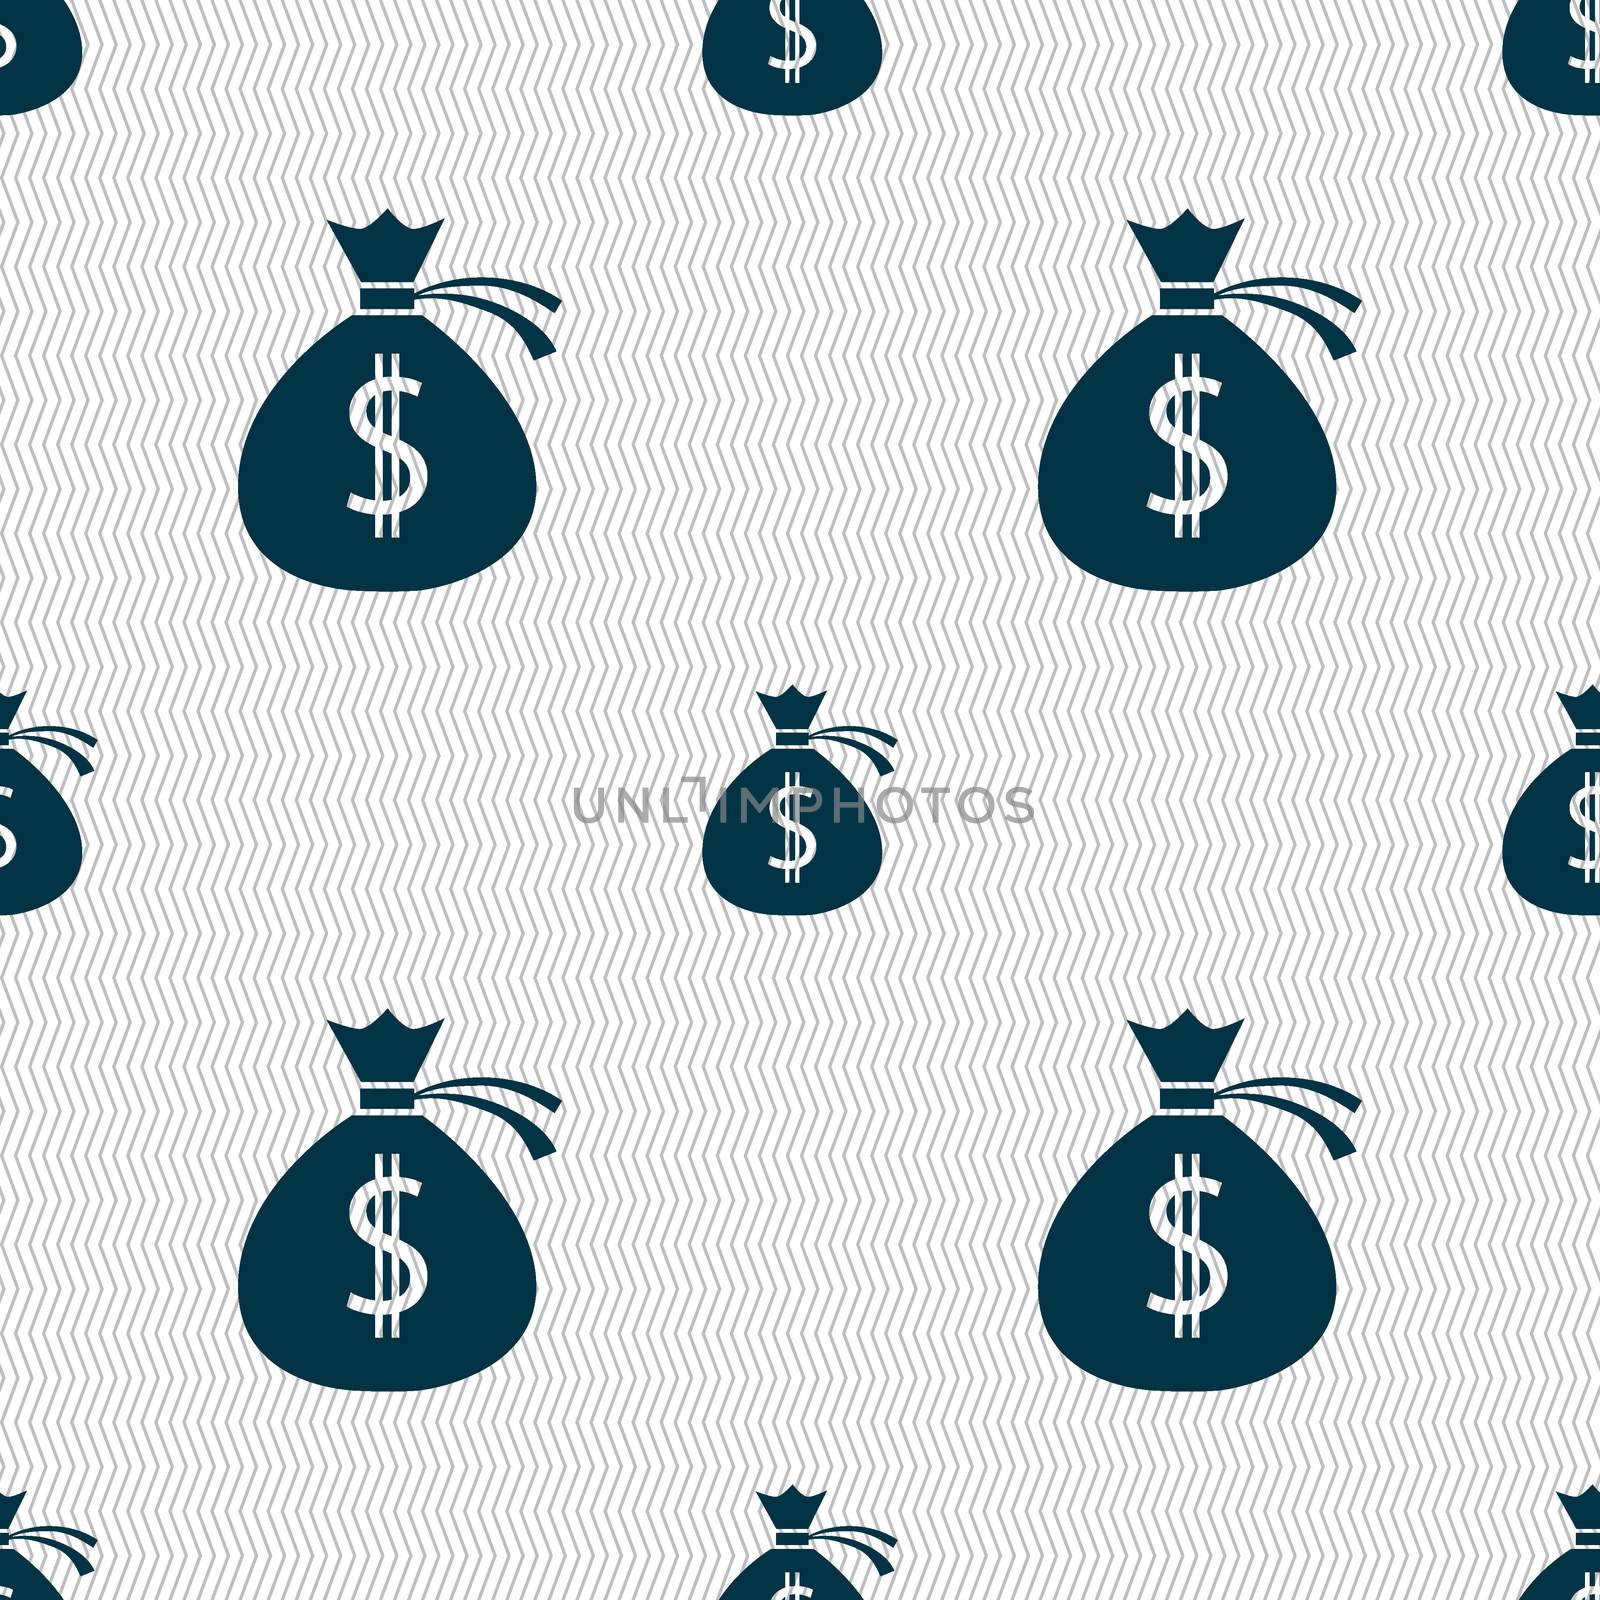 Money bag icon sign. Seamless abstract background with geometric shapes. illustration